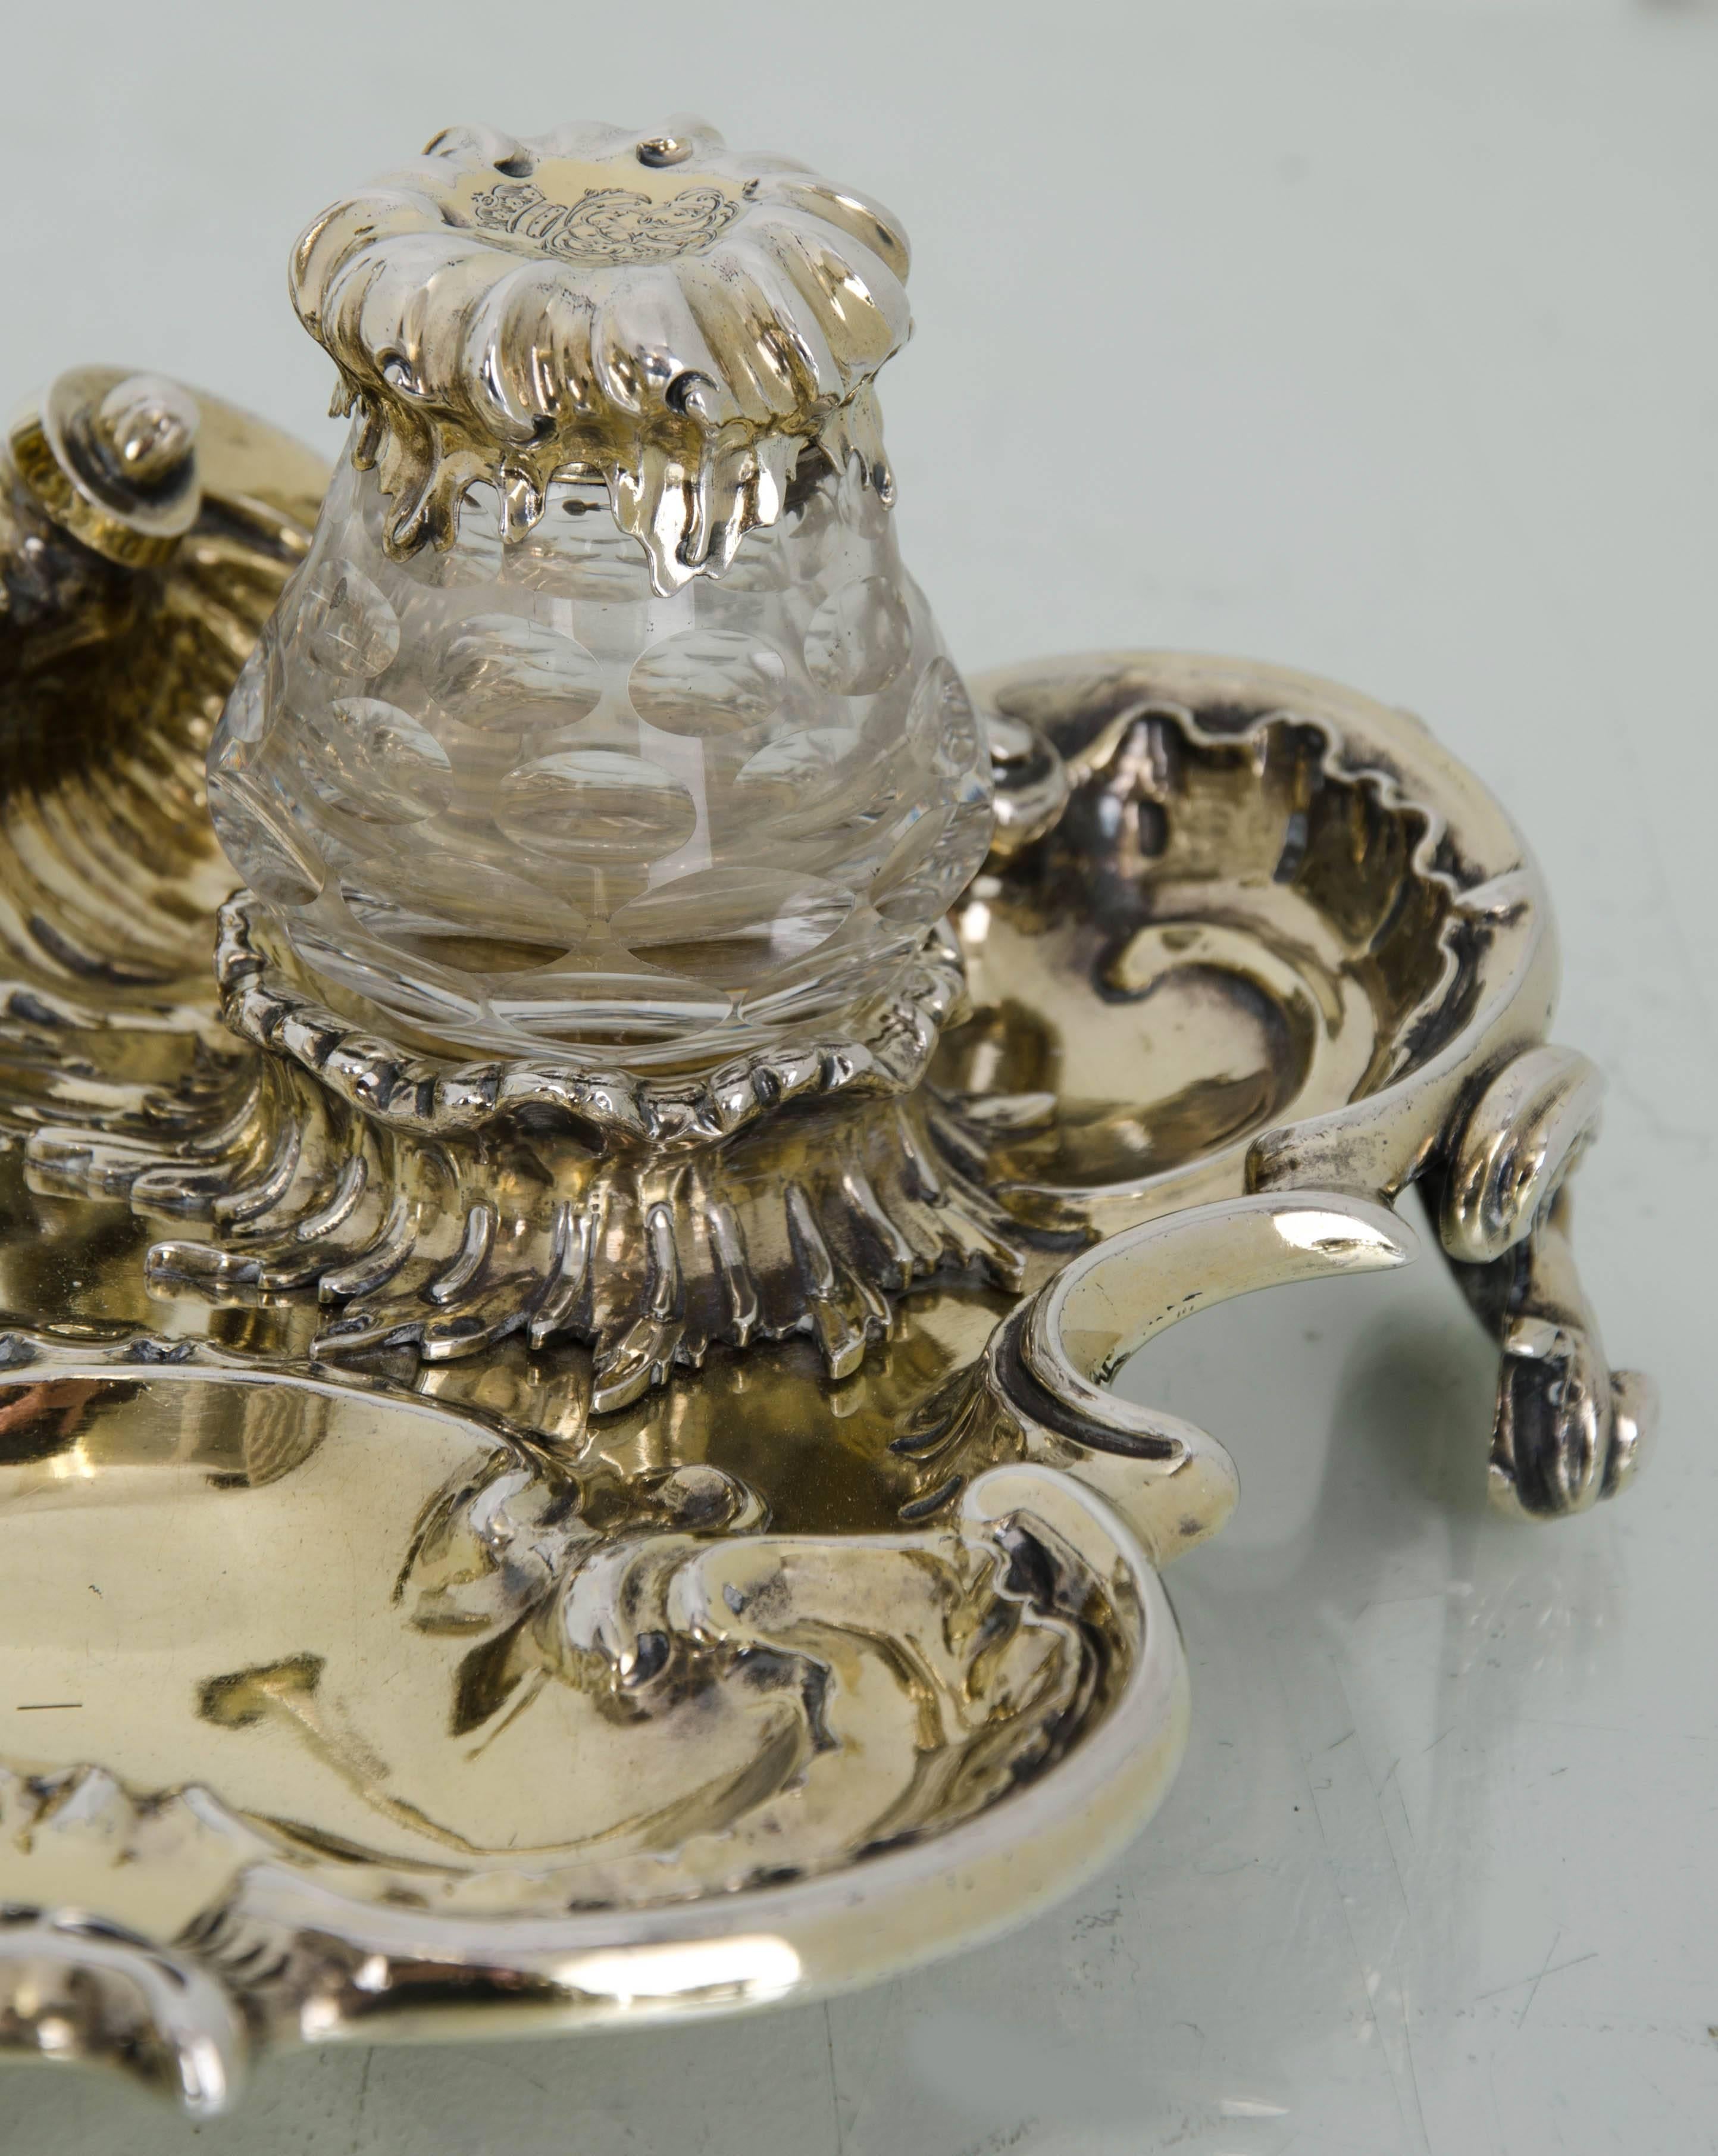 Victorian Antique Silver Gilt 19th Century Desk Inkstand London 1839 Charles Fox

A truly magnificent and exceptionally large, silver gilt, naturalistic desk inkstand.  The inkstand is in a shell form with hand chased, naturalistic decoration